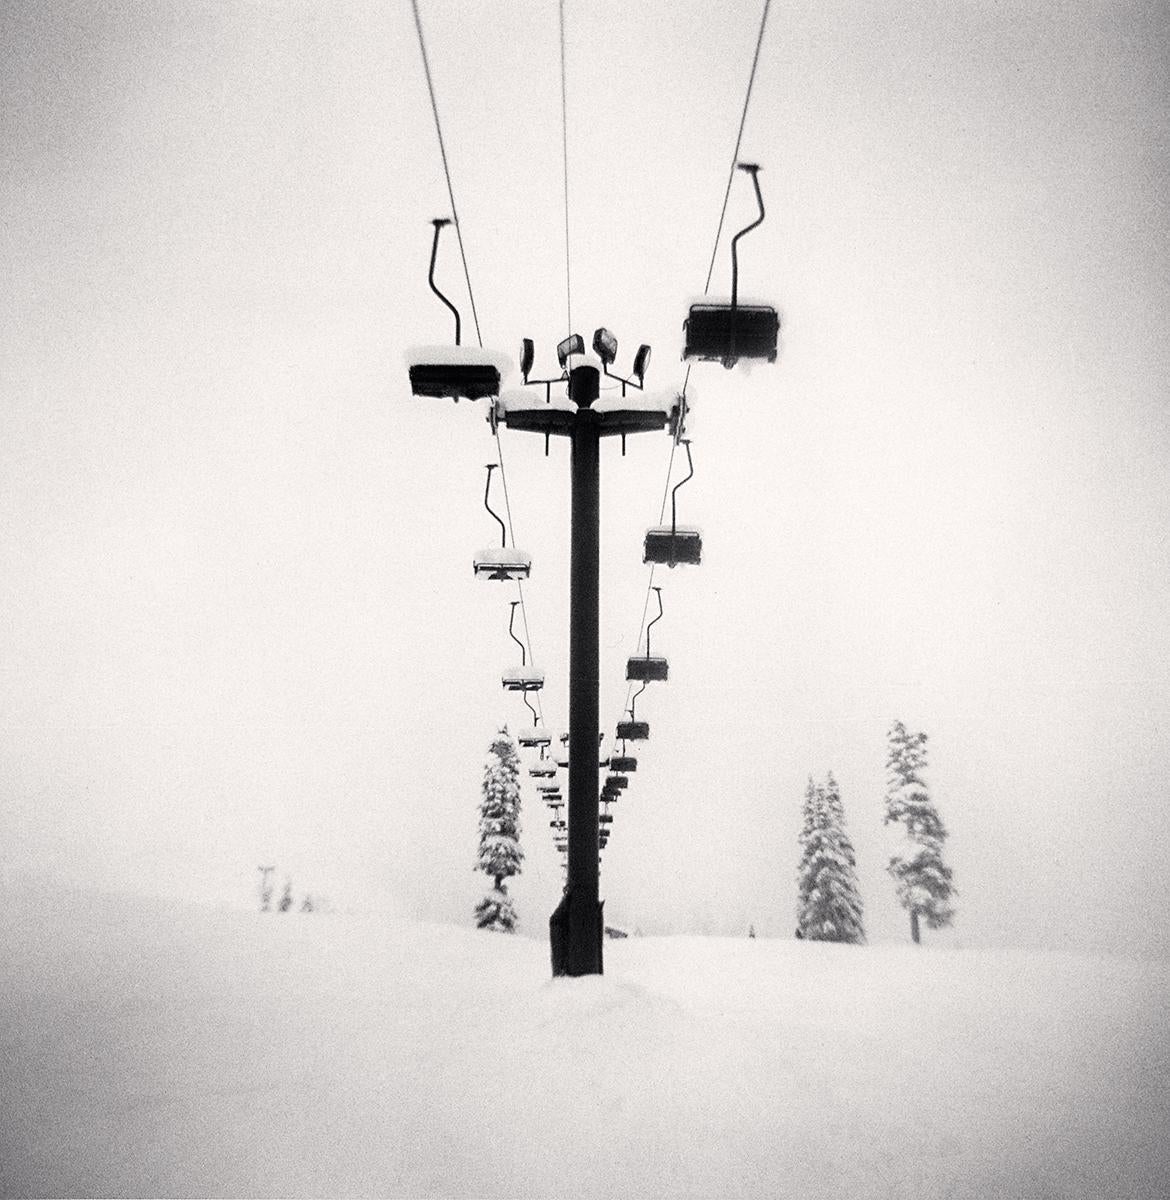 Michael Kenna Black and White Photograph - Chairlift, Snowqualmie, Washington, USA